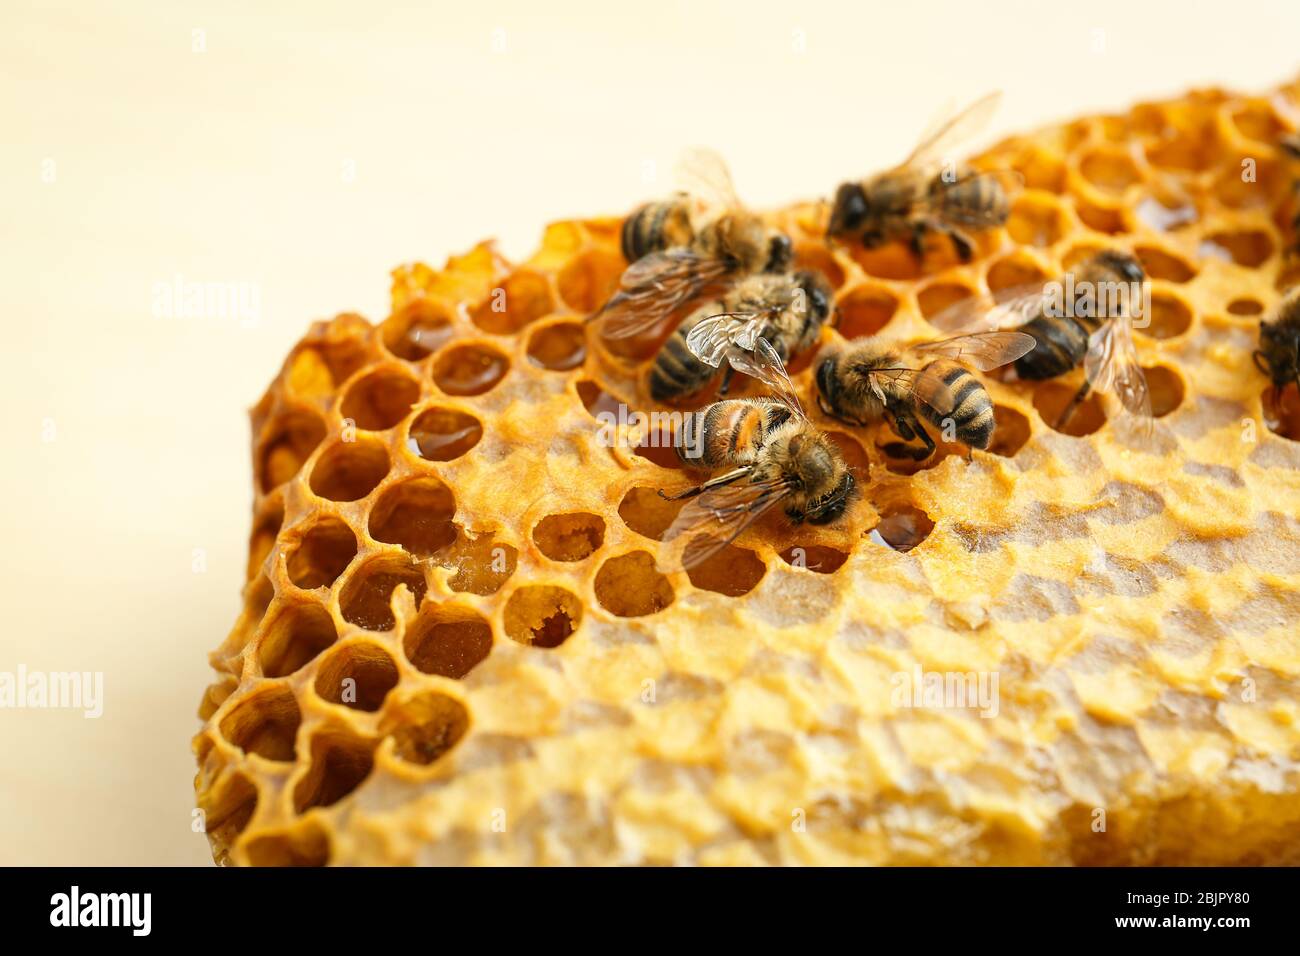 Honeycomb with bees on light background, close up Stock Photo